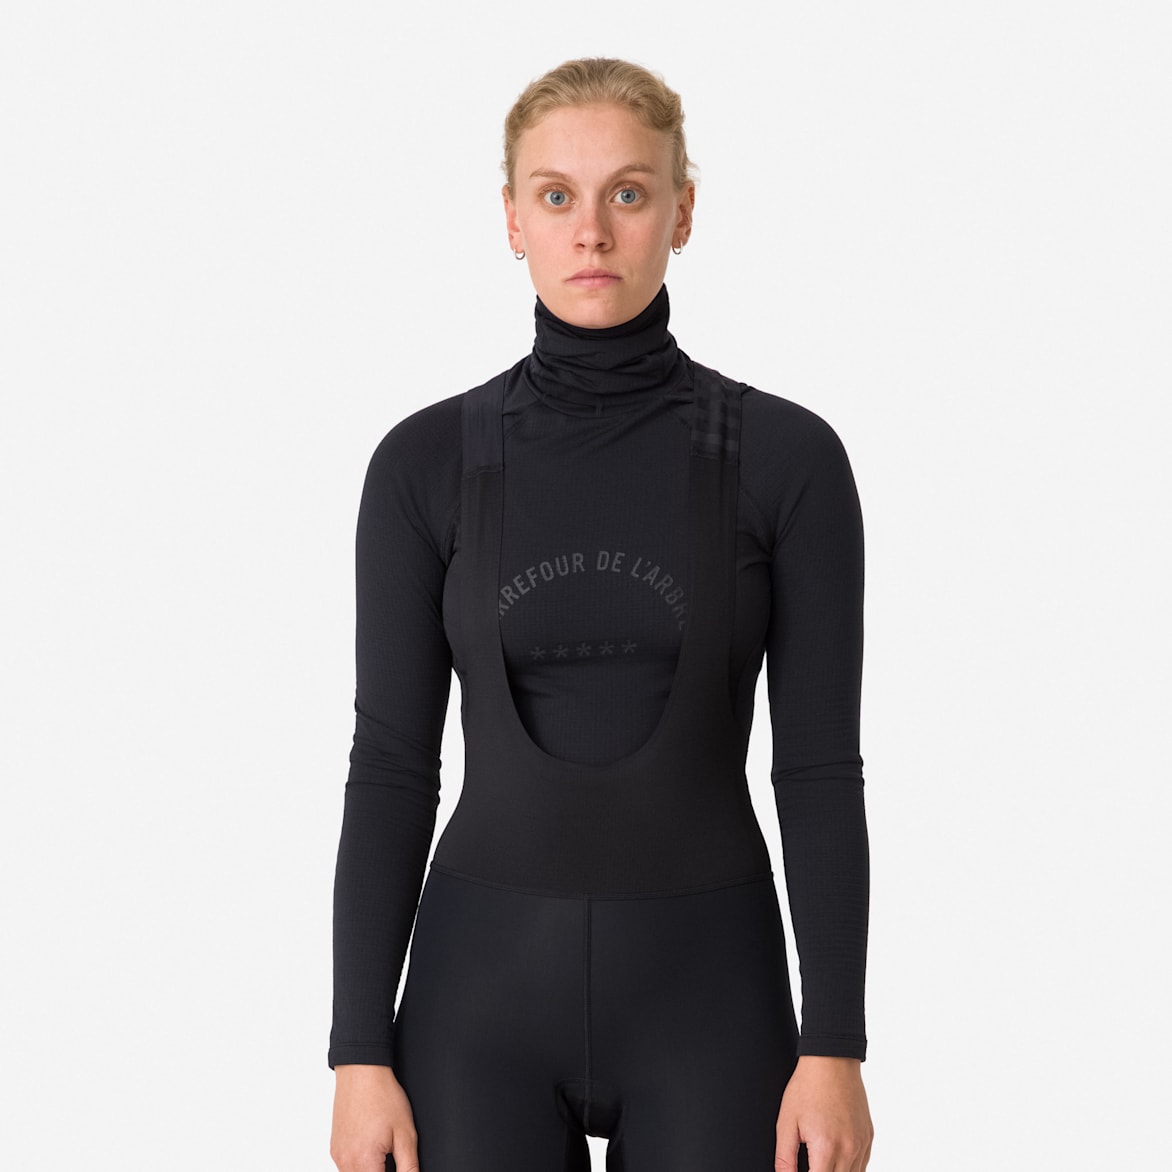 Women's Pro Team Thermal Base Layer